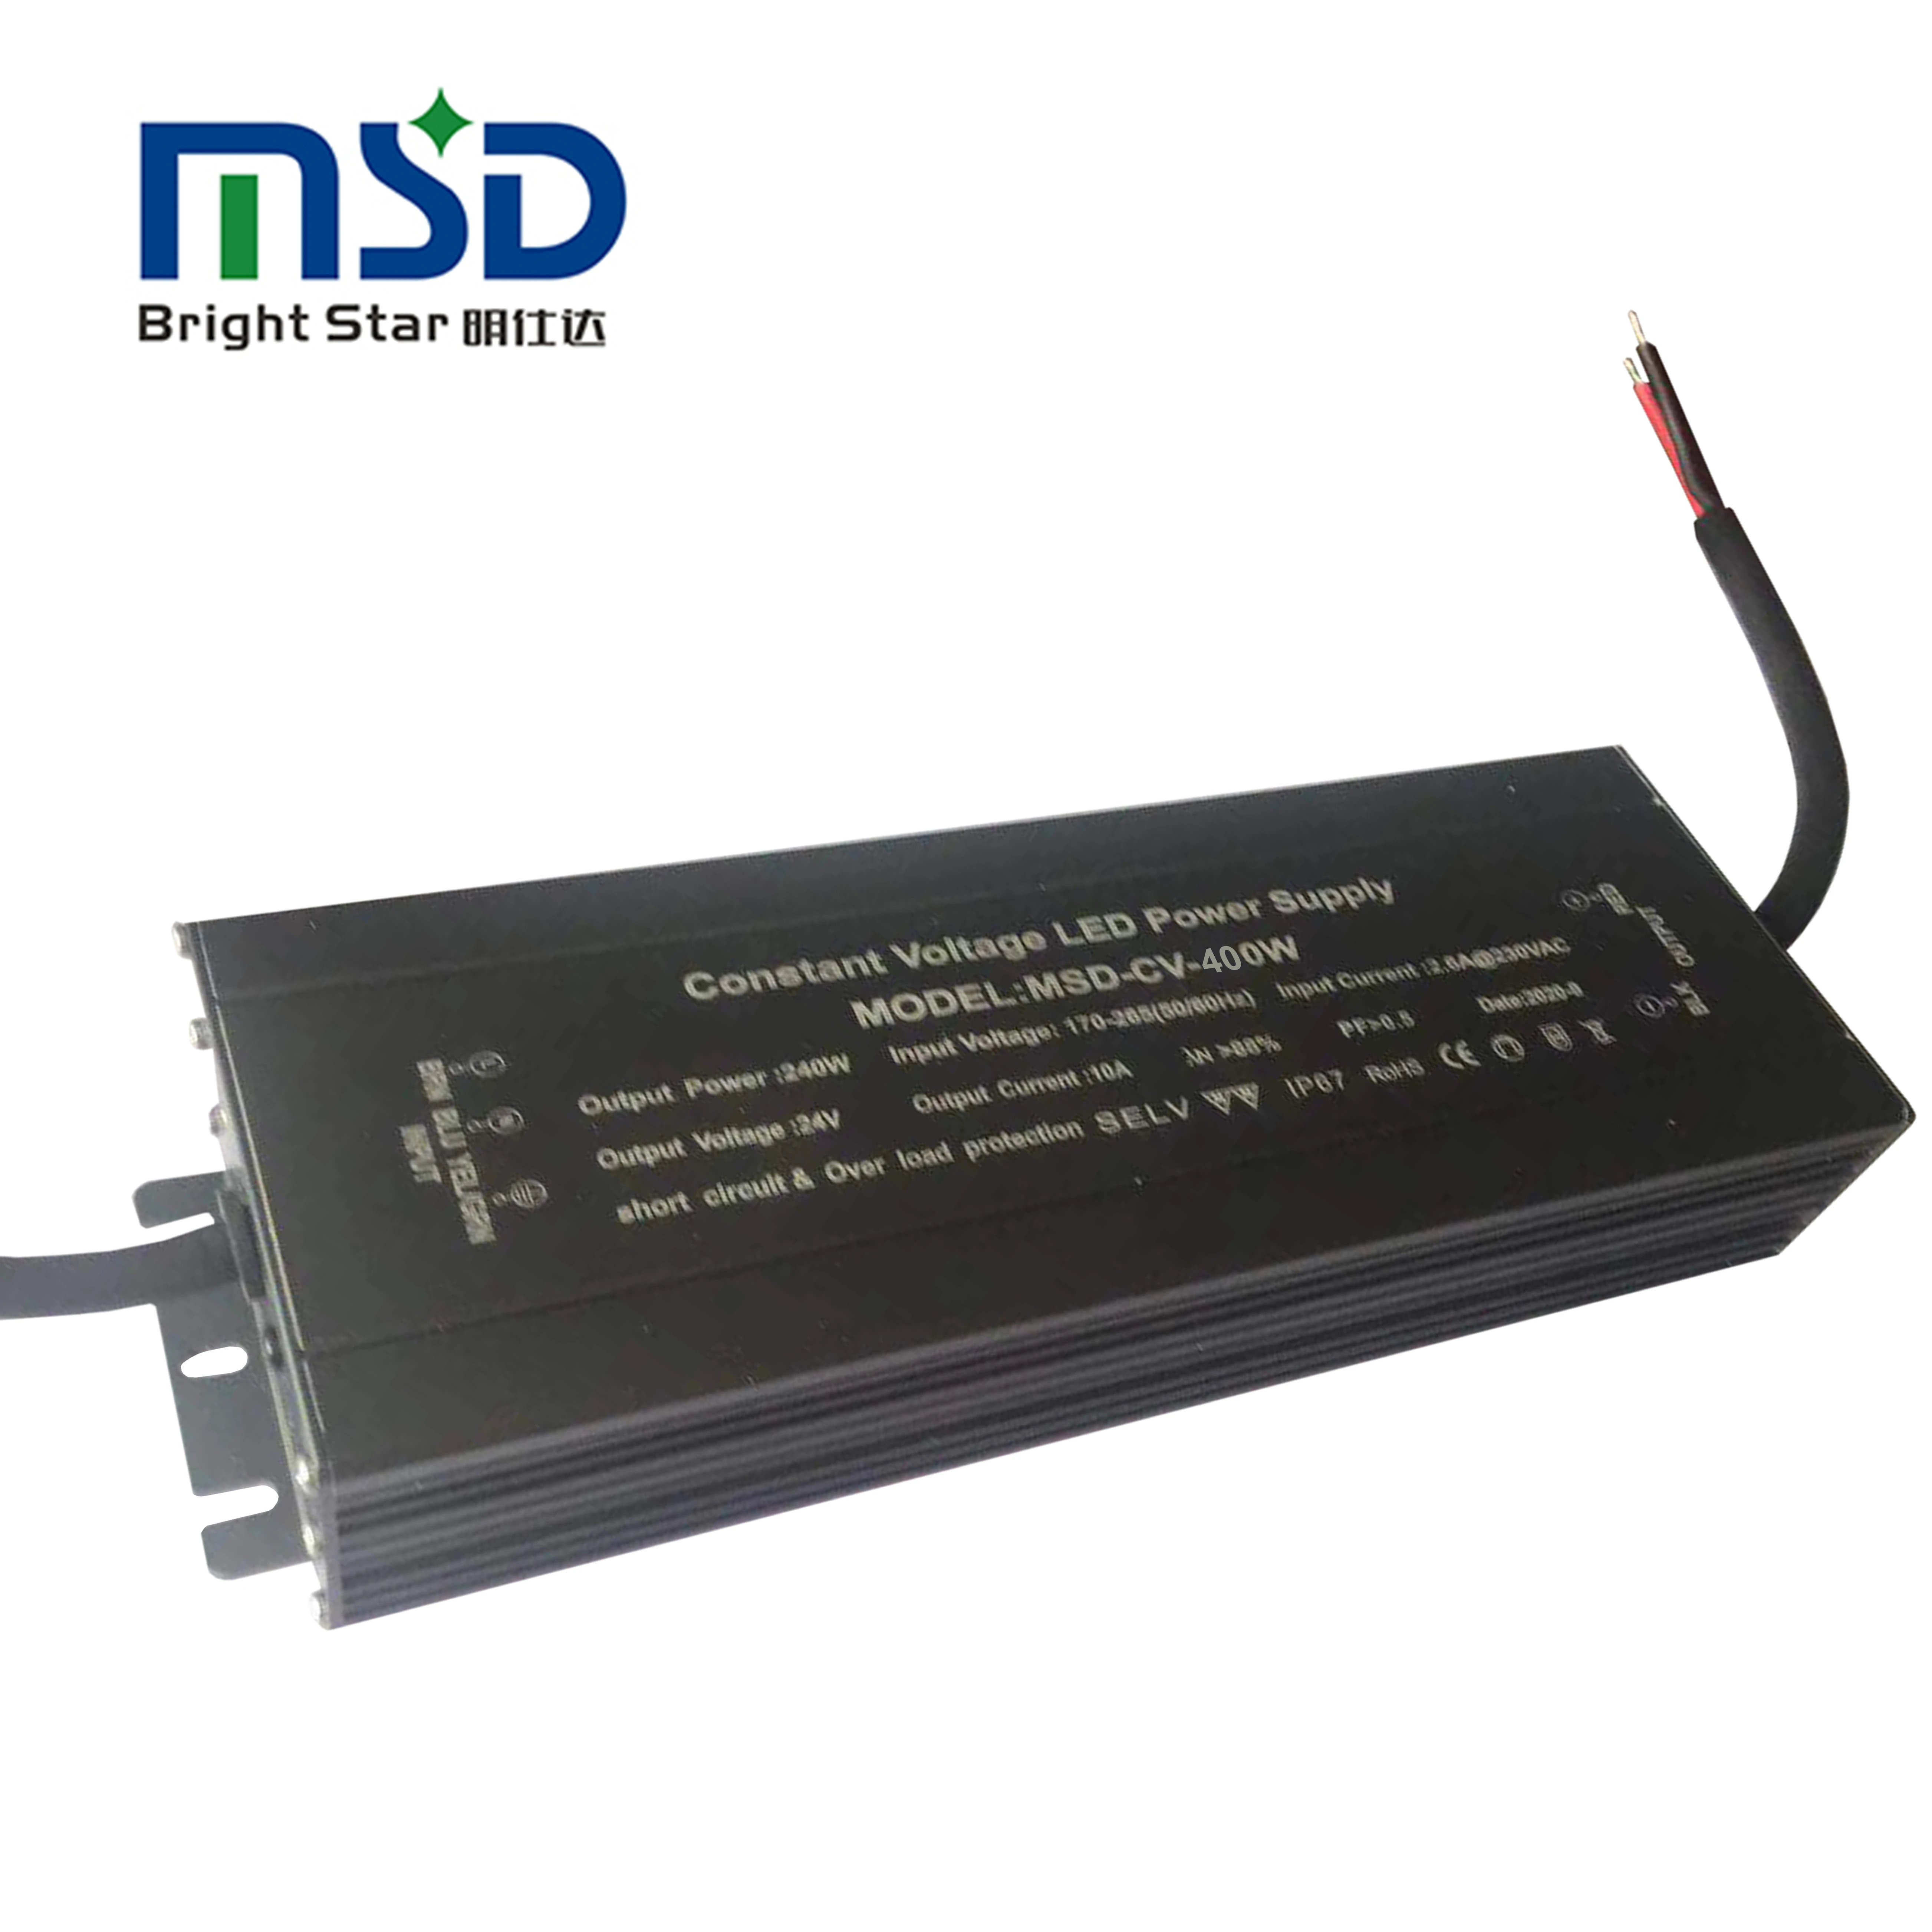 Constant voltage 400W 24V ultra thin led driver waterproof lighting switching power supply light adapter transformer